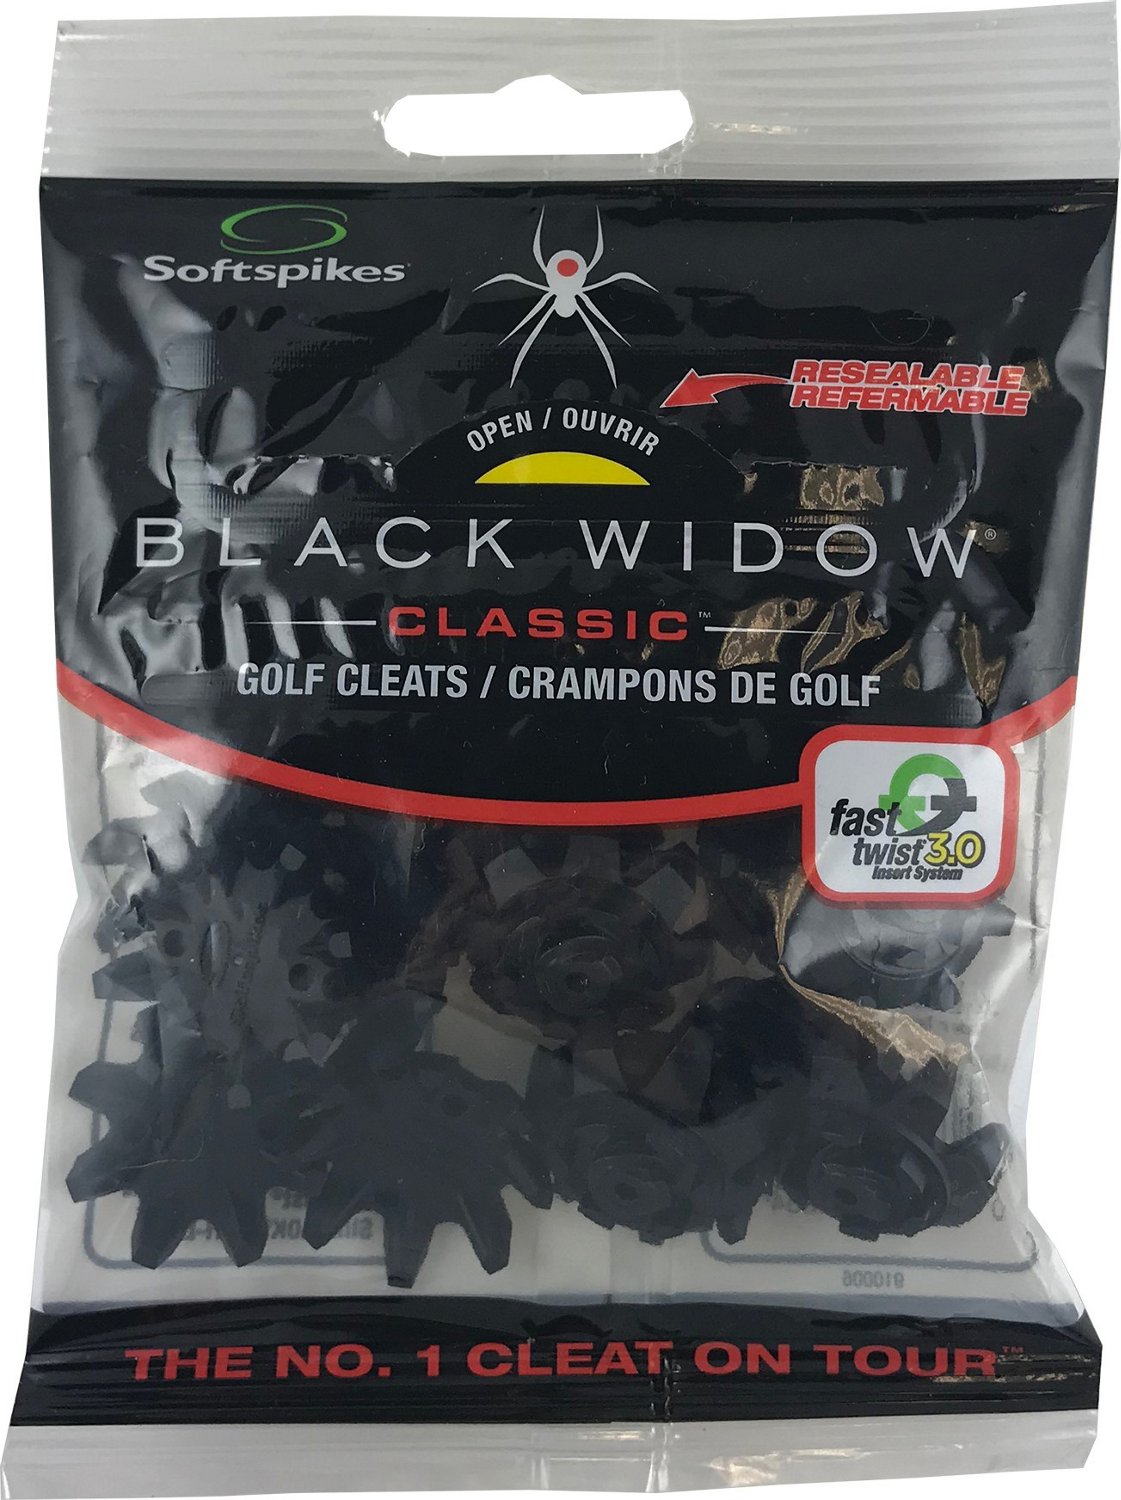 Softspikes Black Widow Fast-Twist Golf Shoe Spikes 16-Pack                                                                       - view number 1 selected